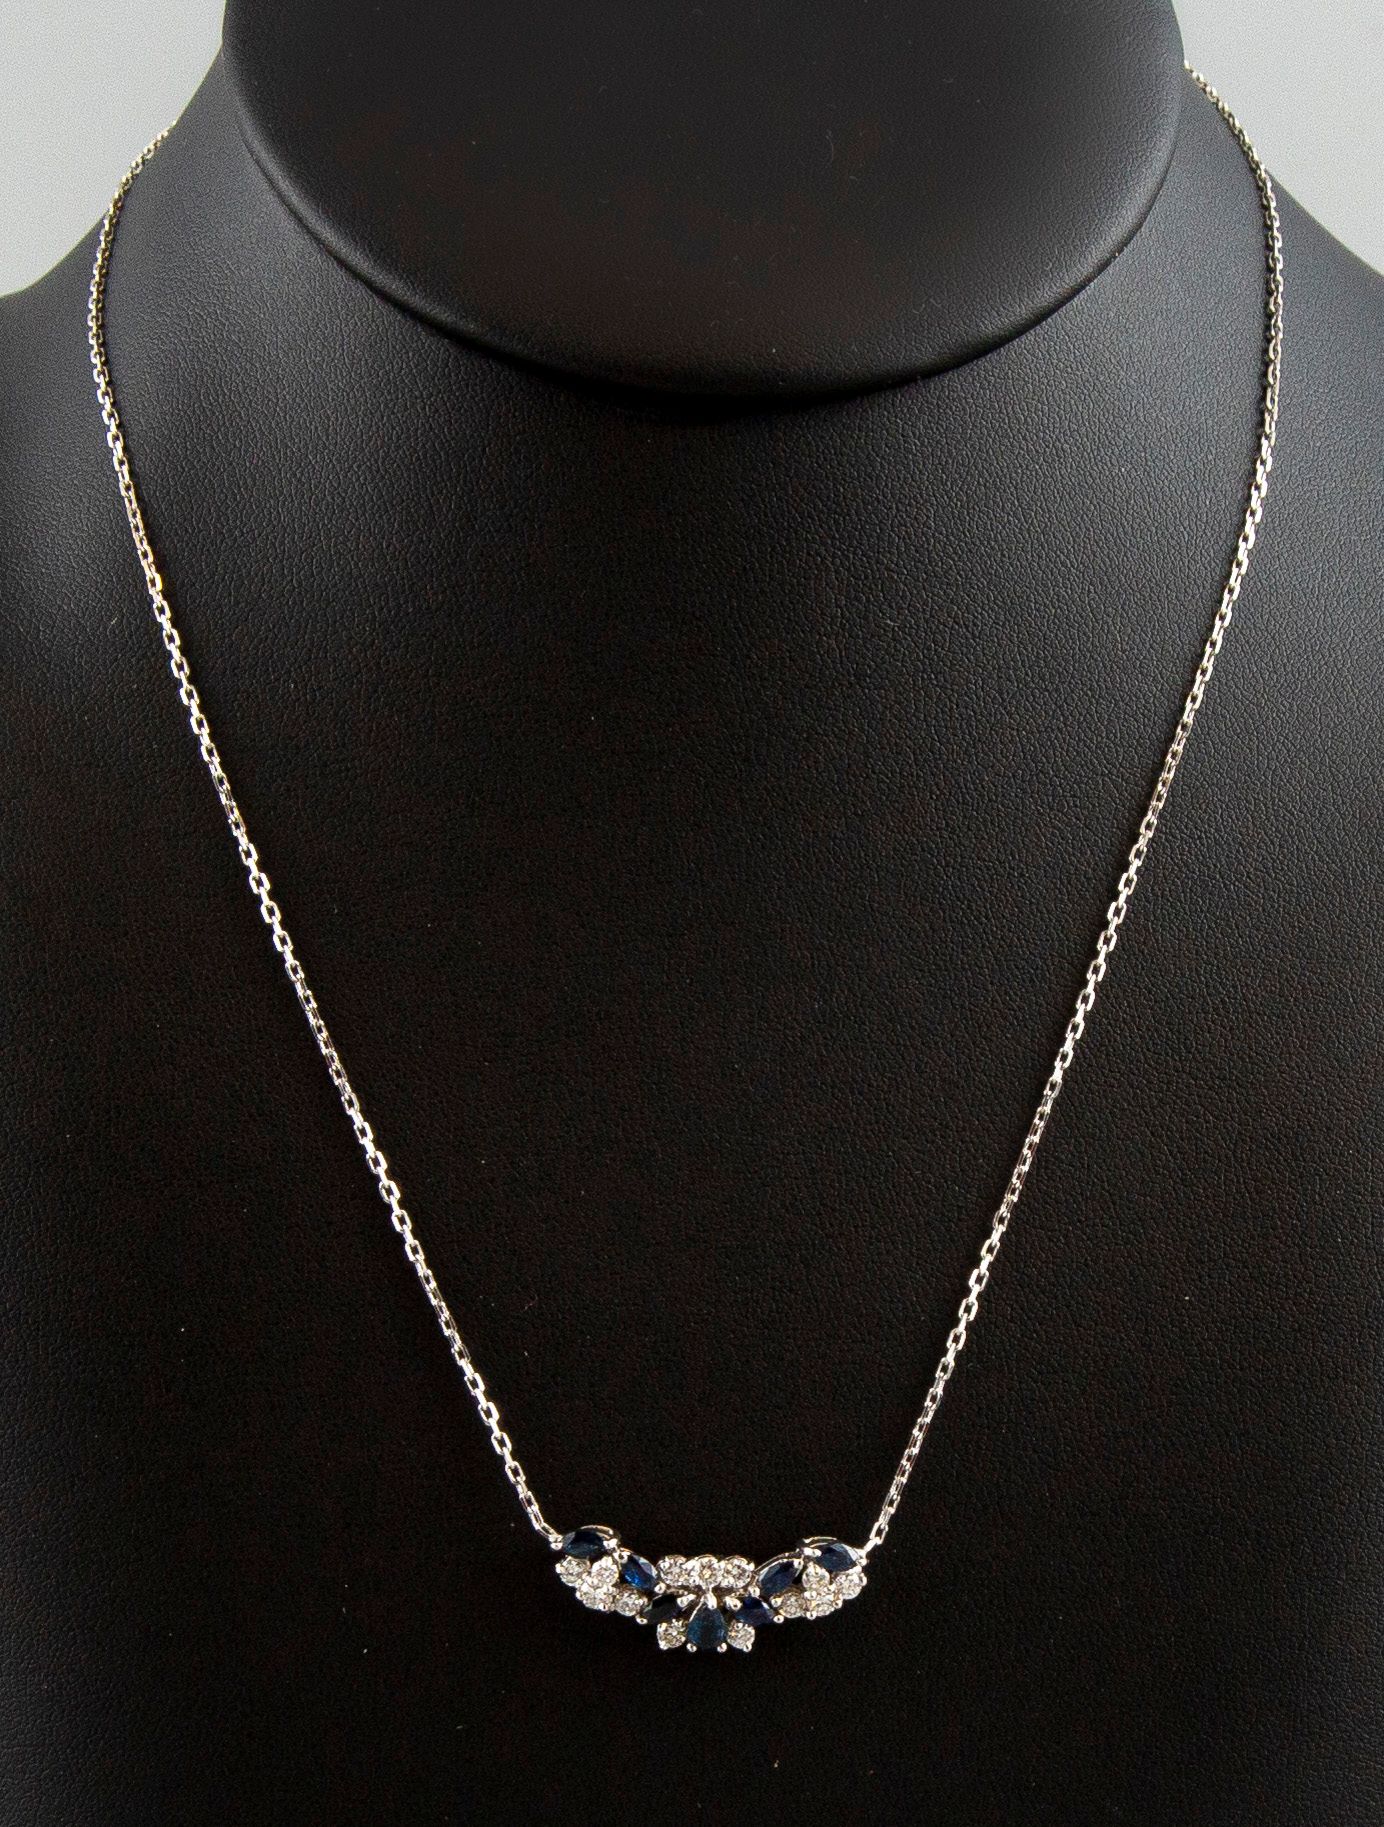 Null Necklace in 18K white gold set with navette sapphires and brilliant-cut dia&hellip;